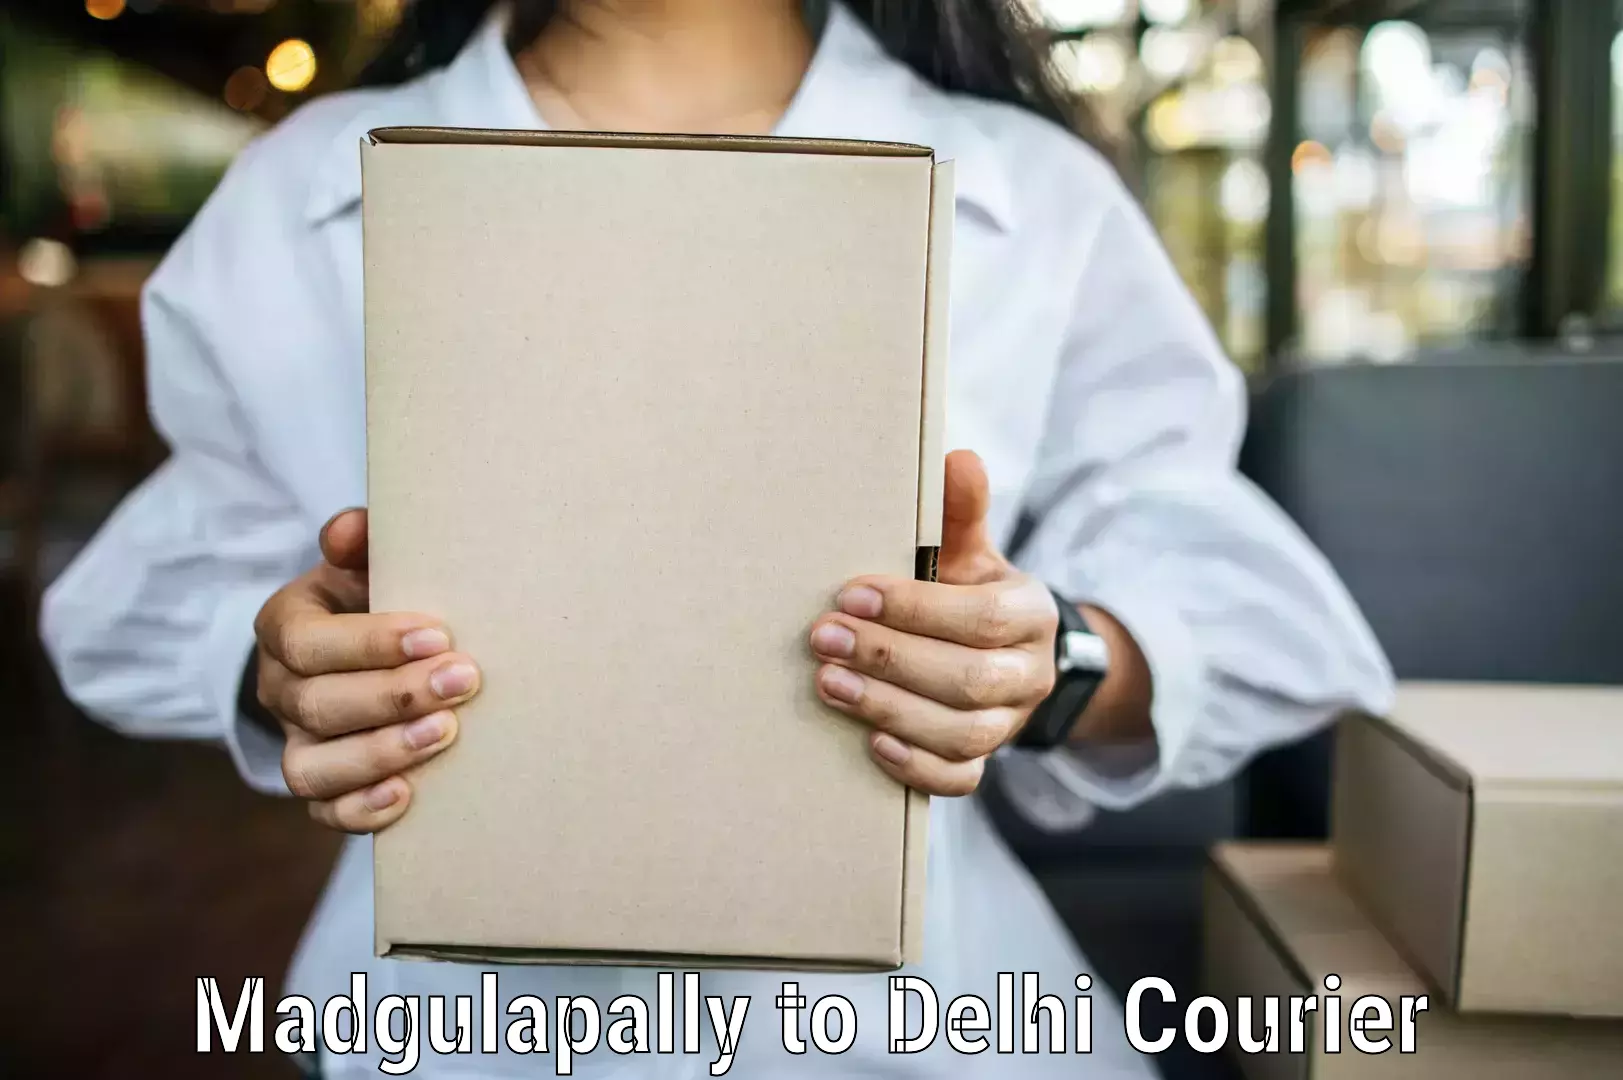 Sustainable courier practices Madgulapally to Krishna Nagar